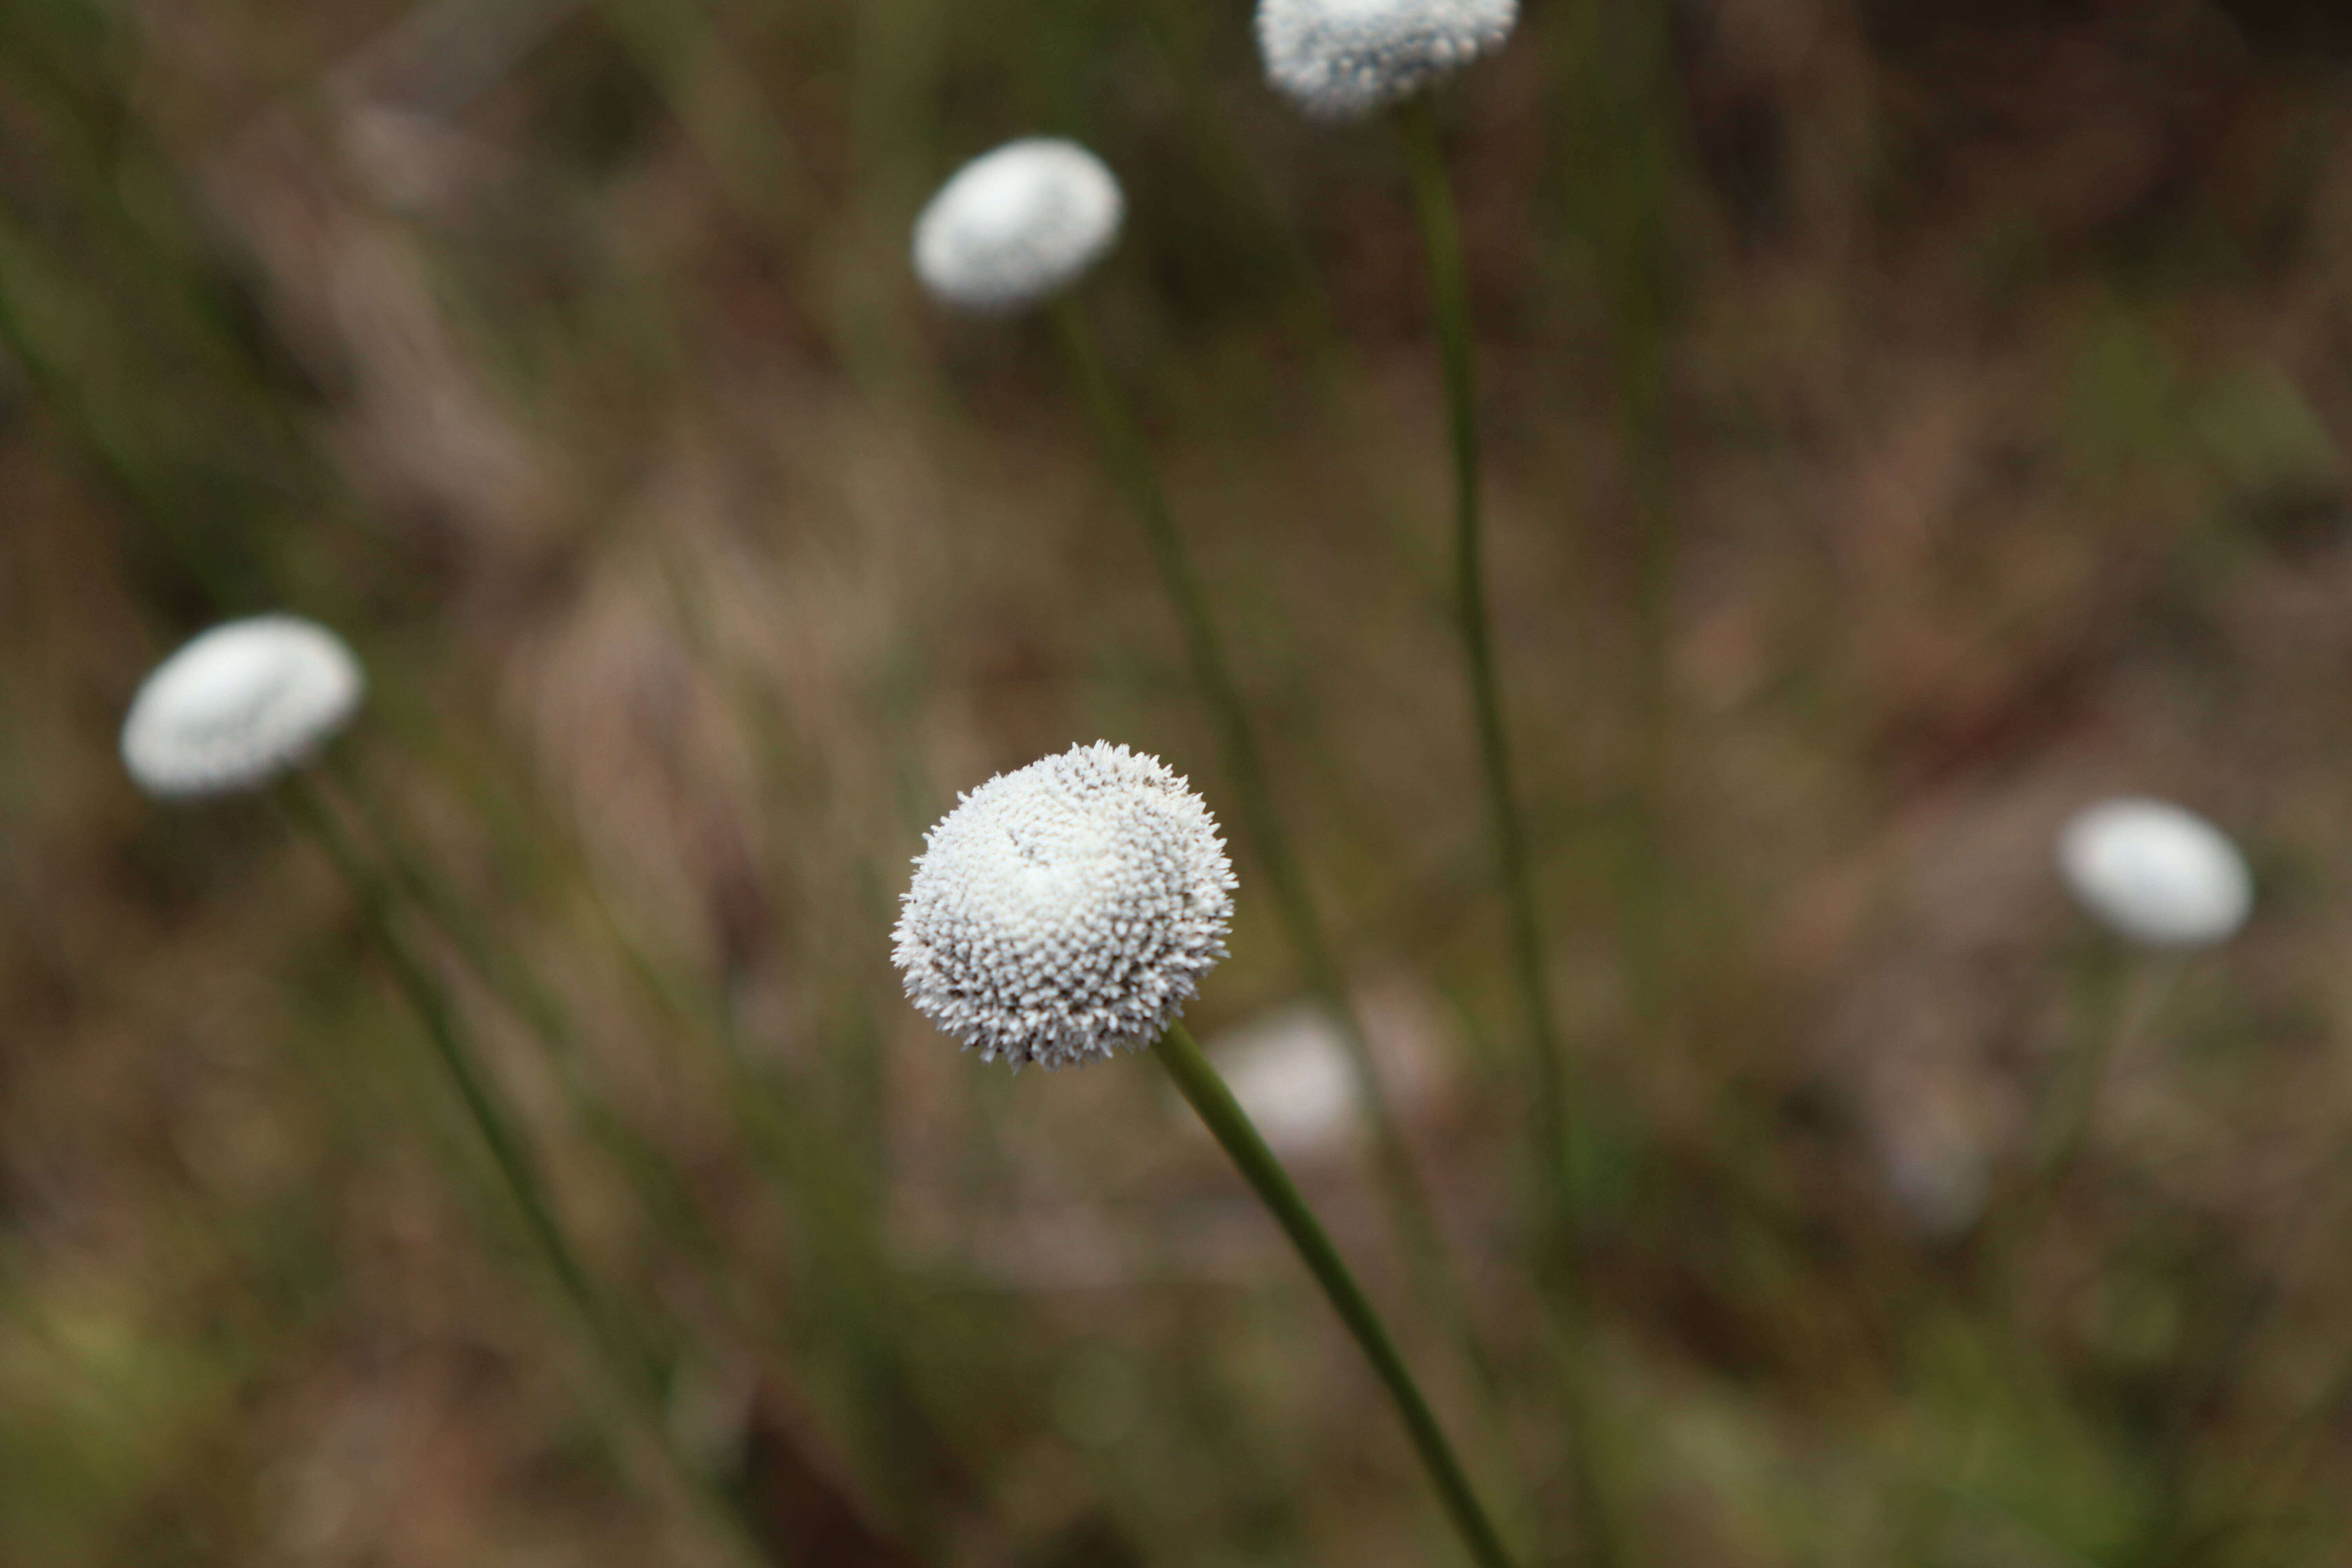 Image of flattened pipewort